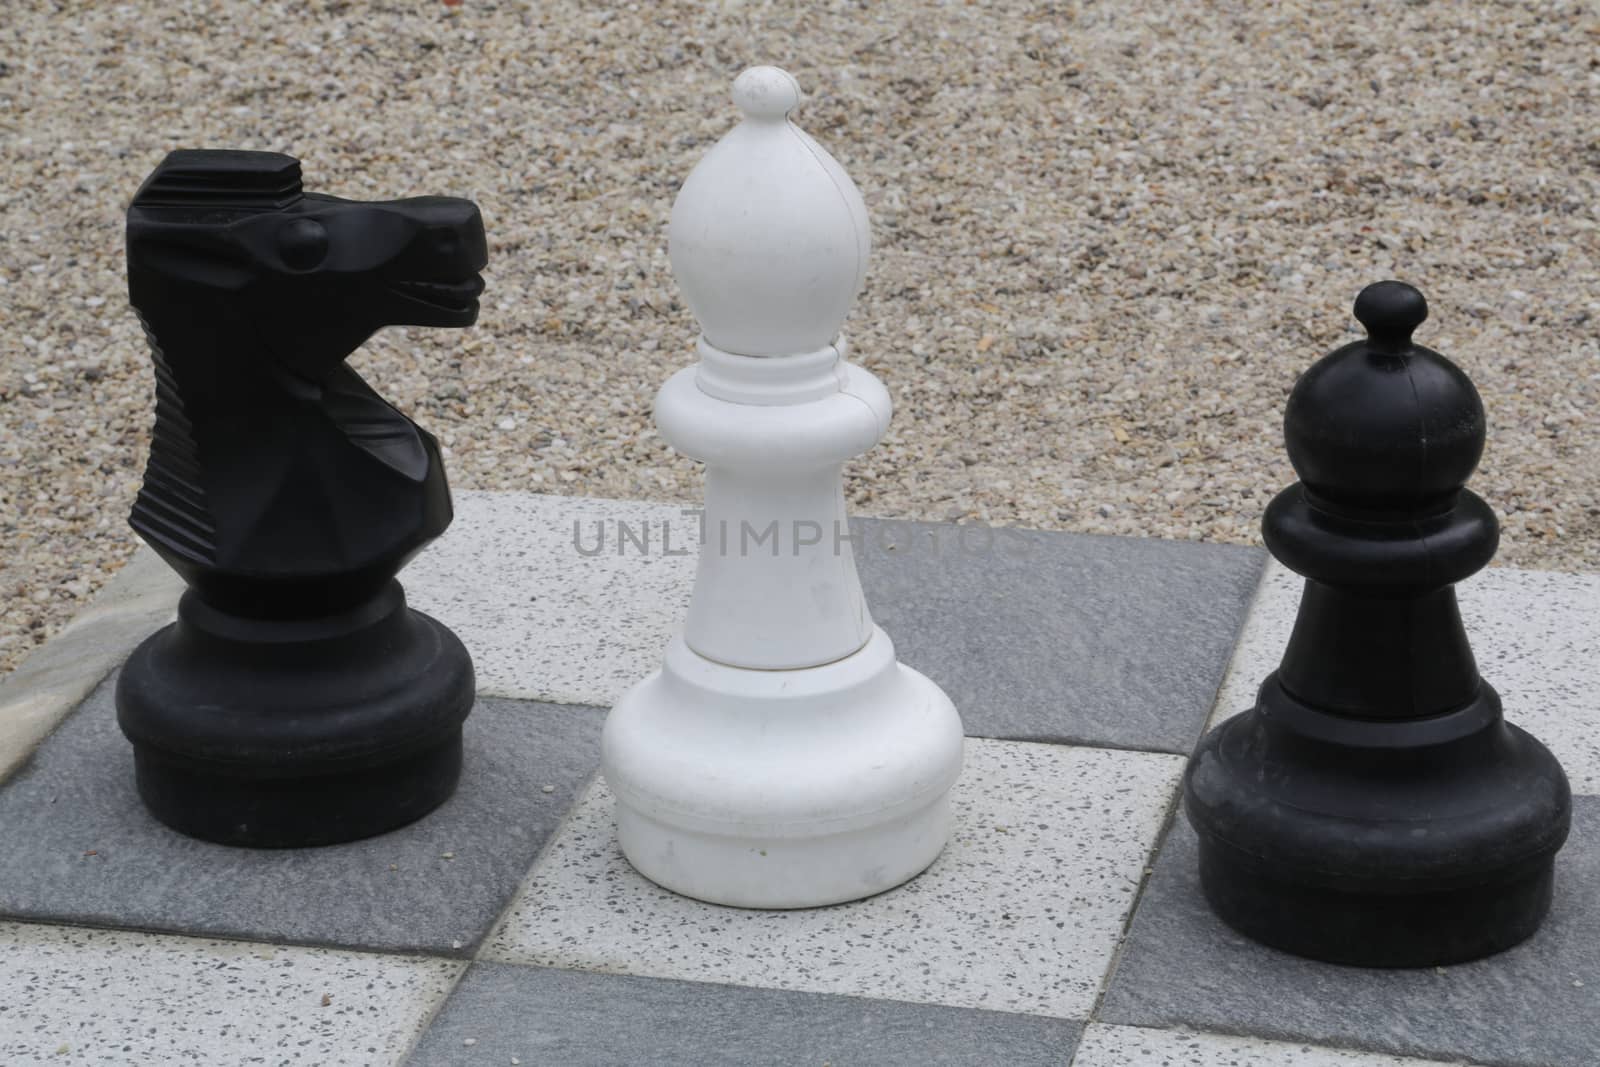 Black and white king on a chess board in open air